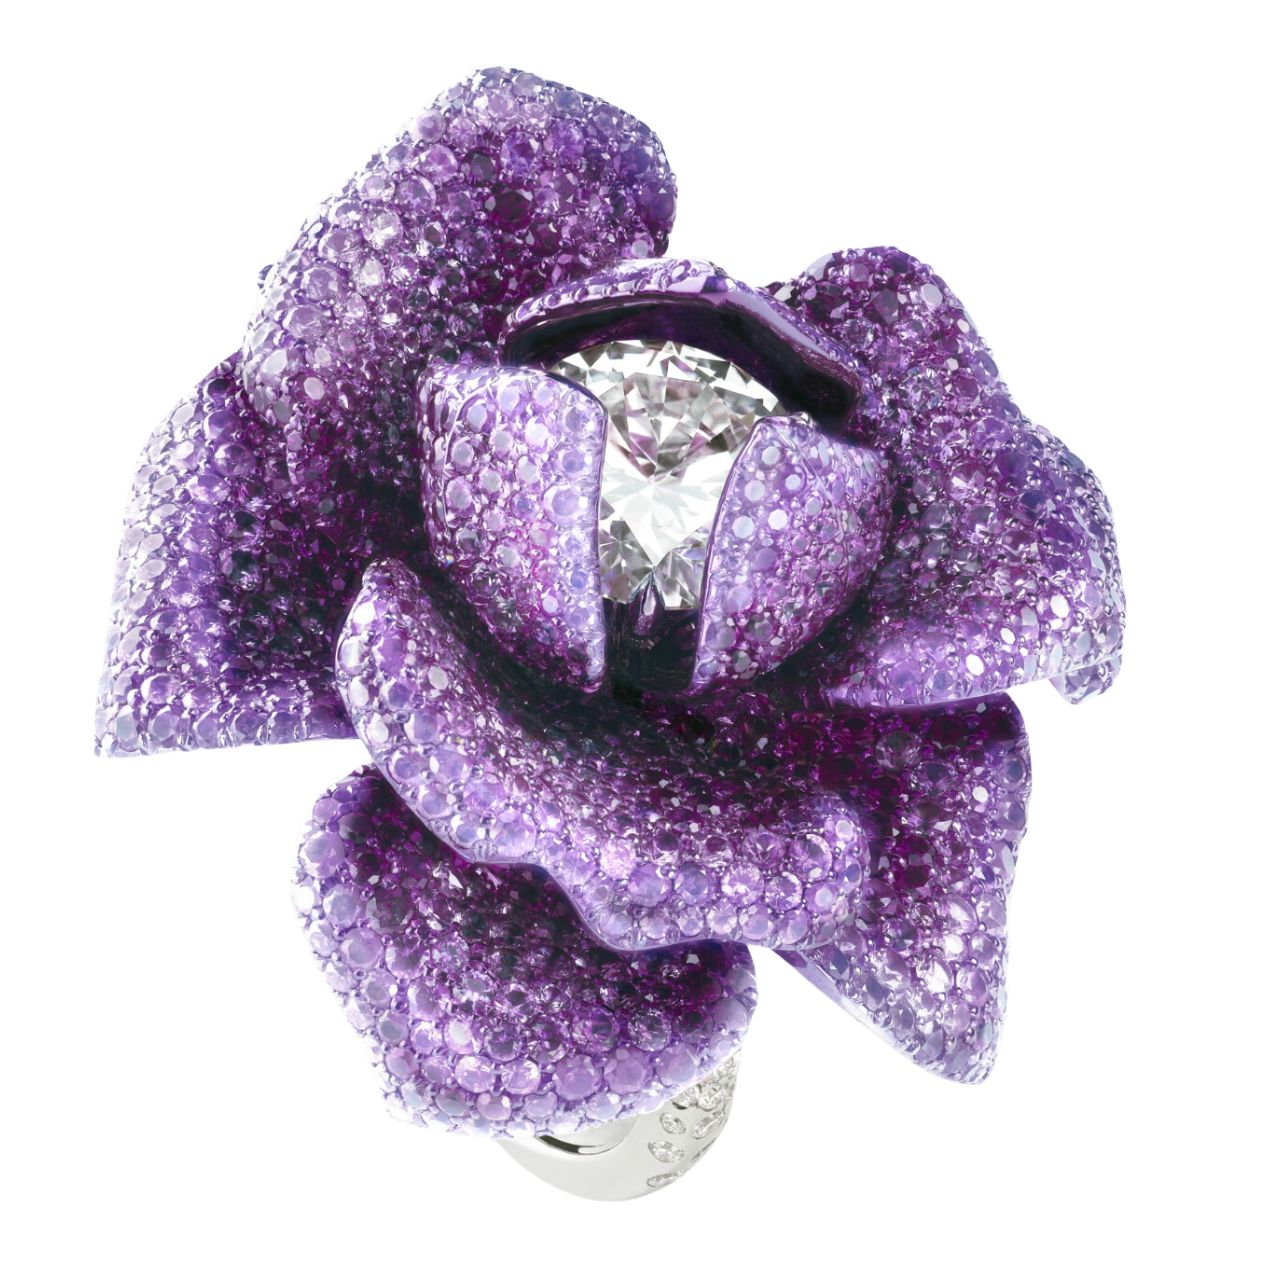 Haute Joaillerie Collection in Fairmined-certified 18k white gold and titanium with diamonds, sapphires, and amethysts.